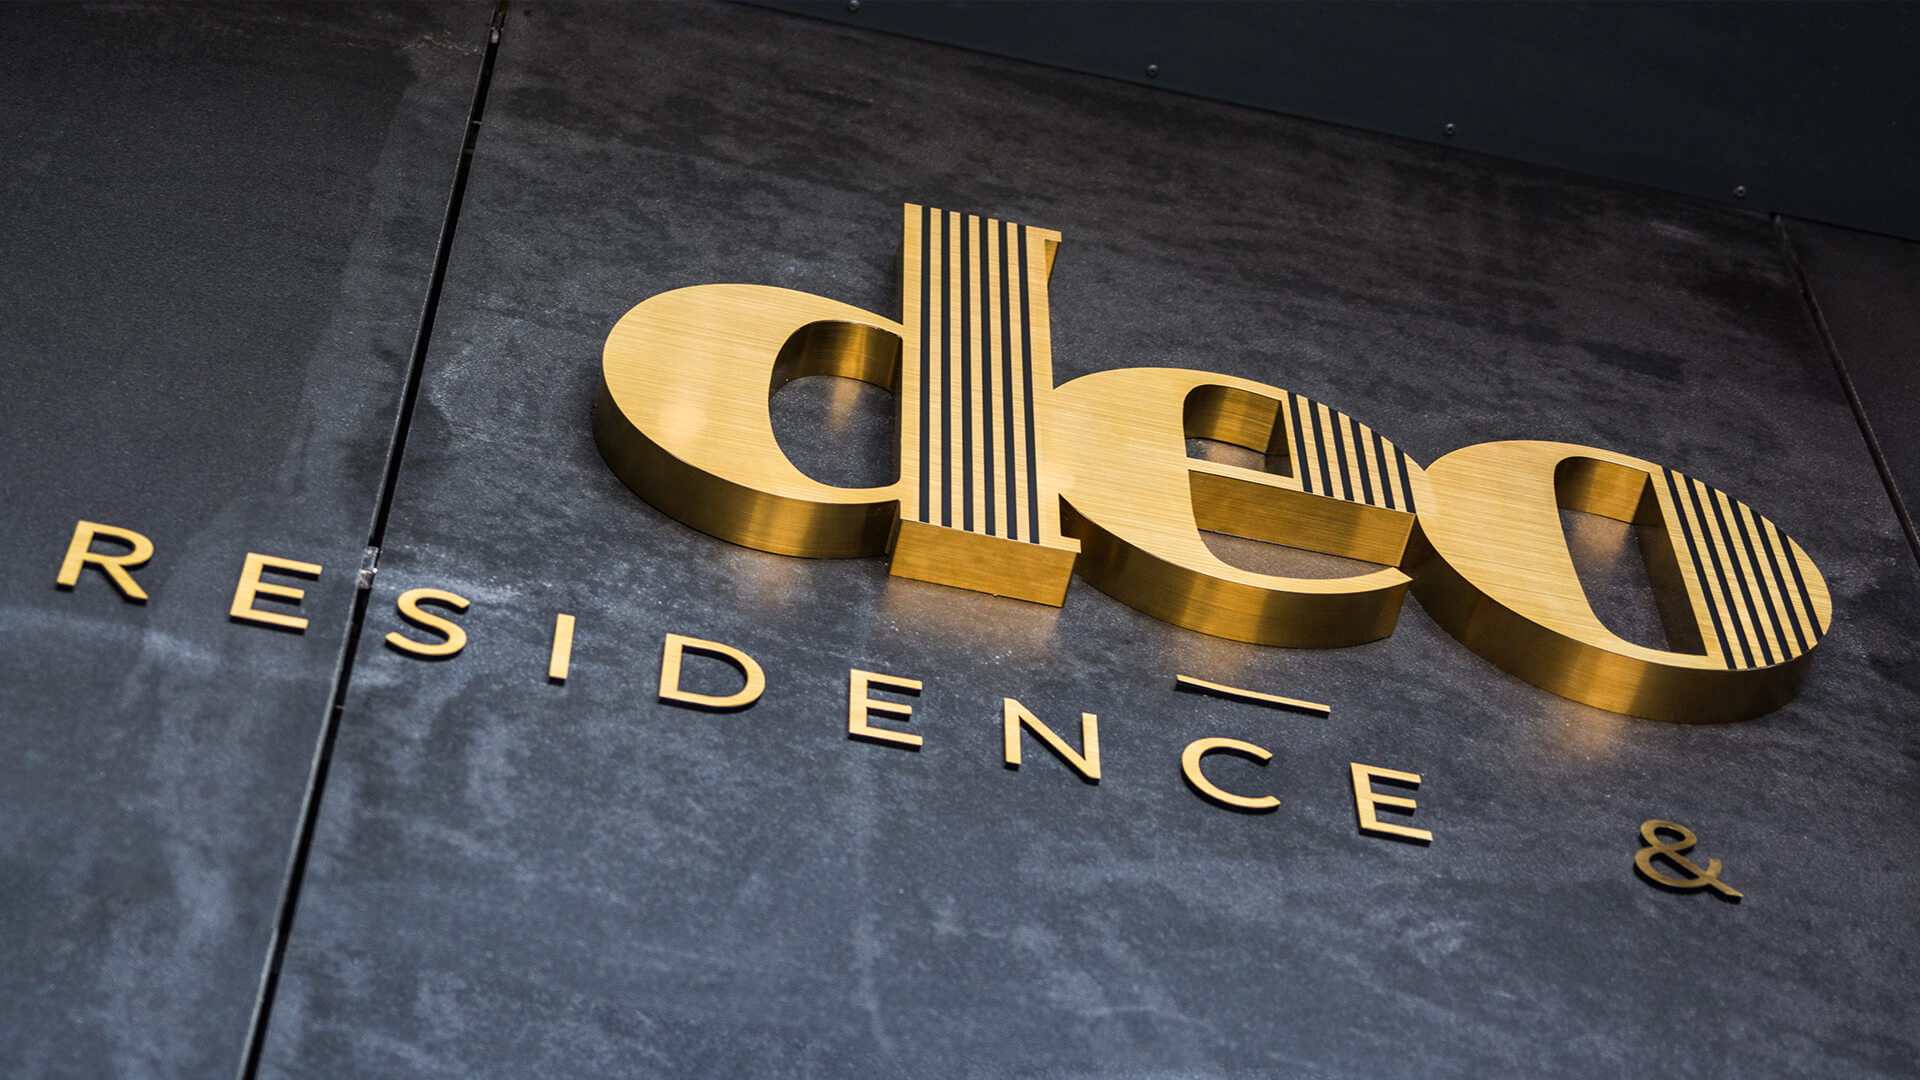 deo-residence-lettering-from-solid-steel-brushed-lettering-over-the-entry-to-the-office-building-lettering-at-height-mounted-to-the-wall-lettering-on-sheets-lettering-on-decks-logo-firm-gdansk